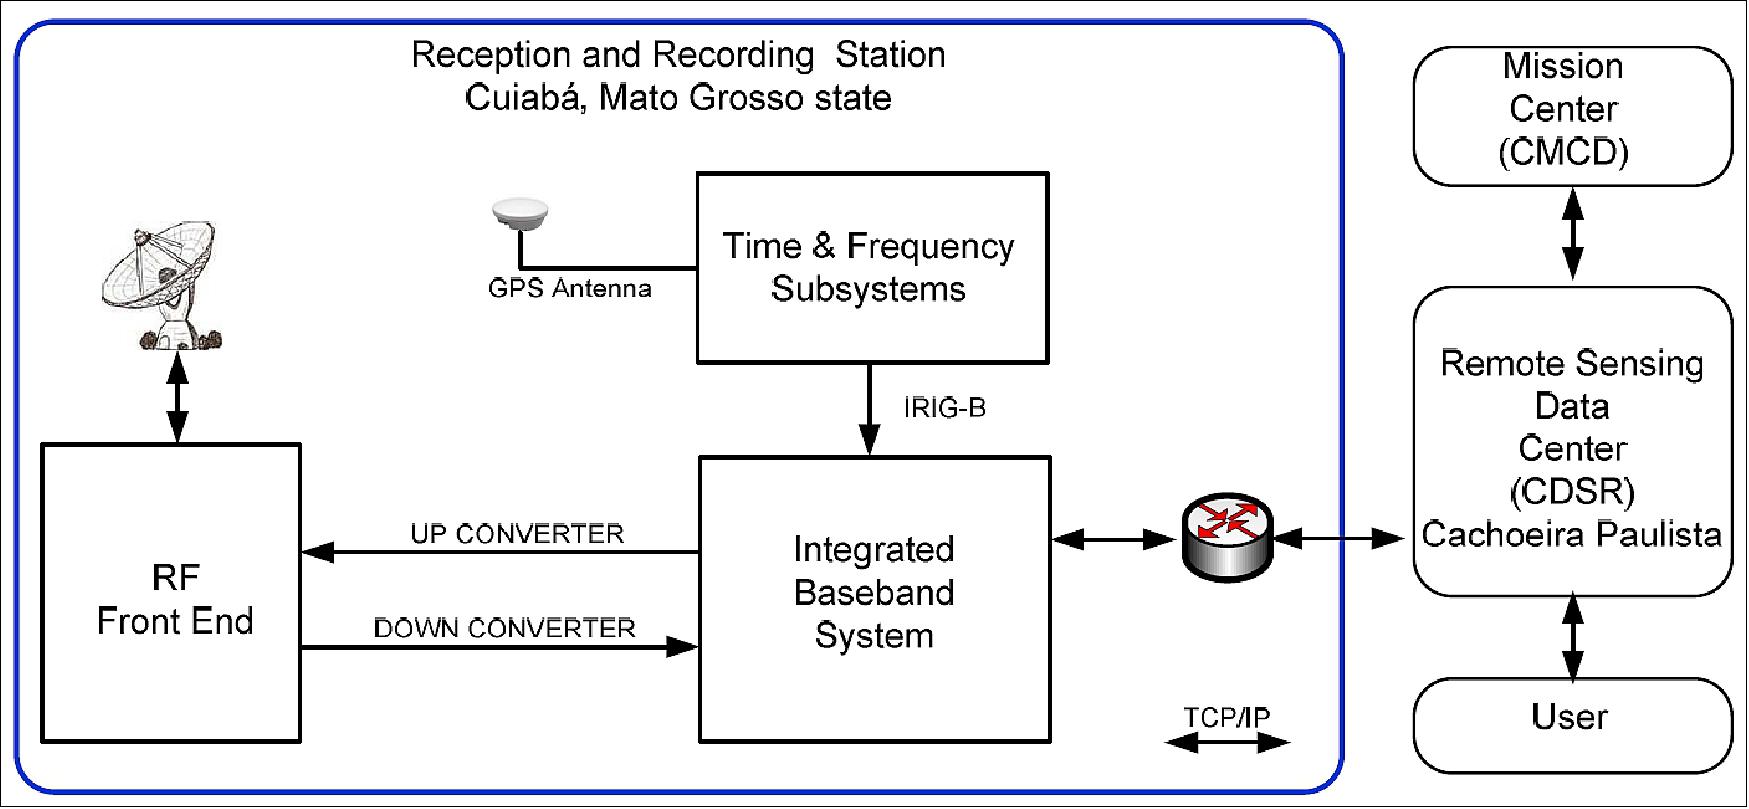 Figure 11: X-band reception and recording station (image credit: INPE)